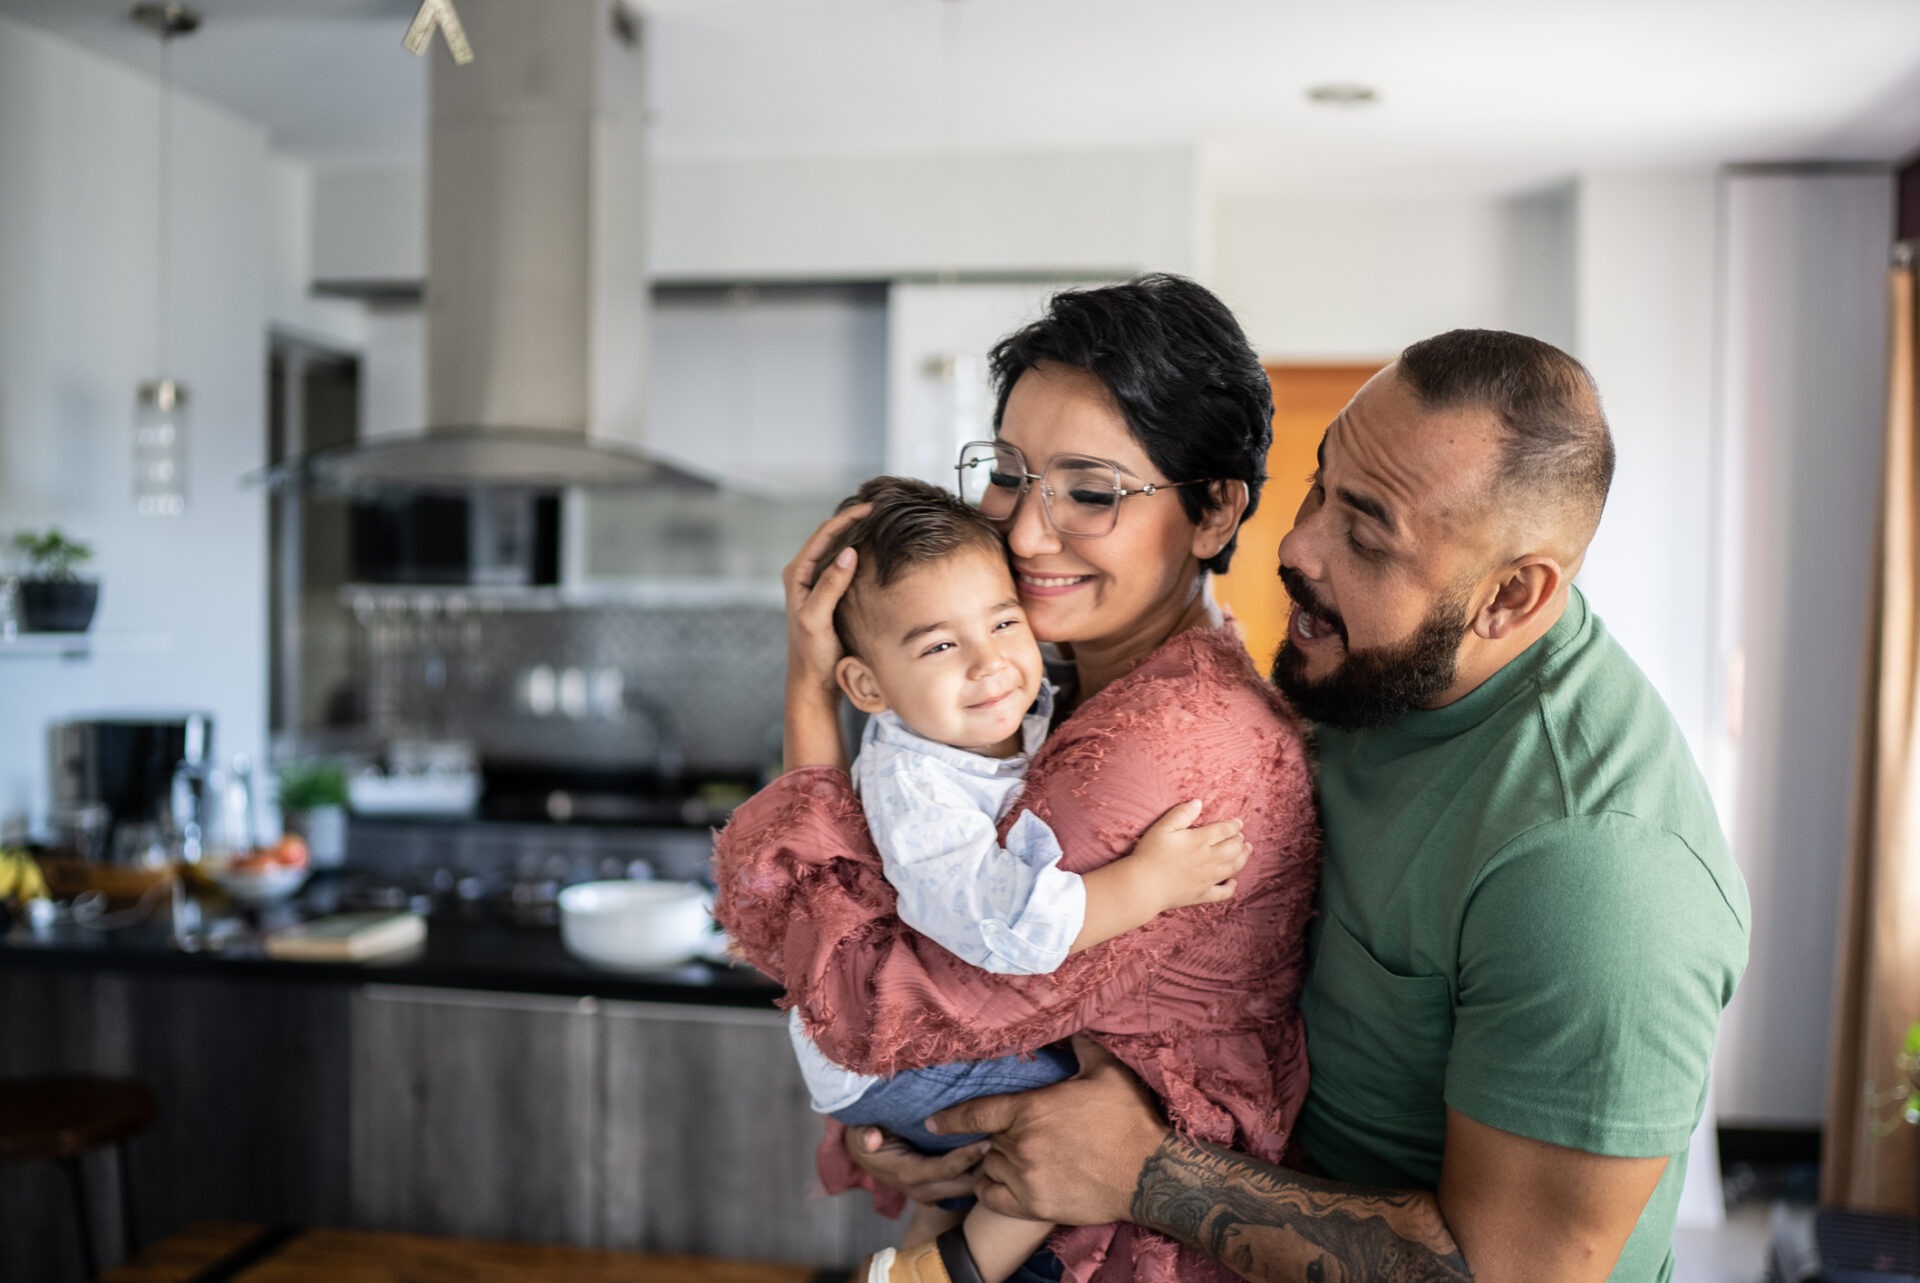 A family of three—a child and two adults—are embracing warmly in a well-equipped home kitchen, exuding happiness and affection.